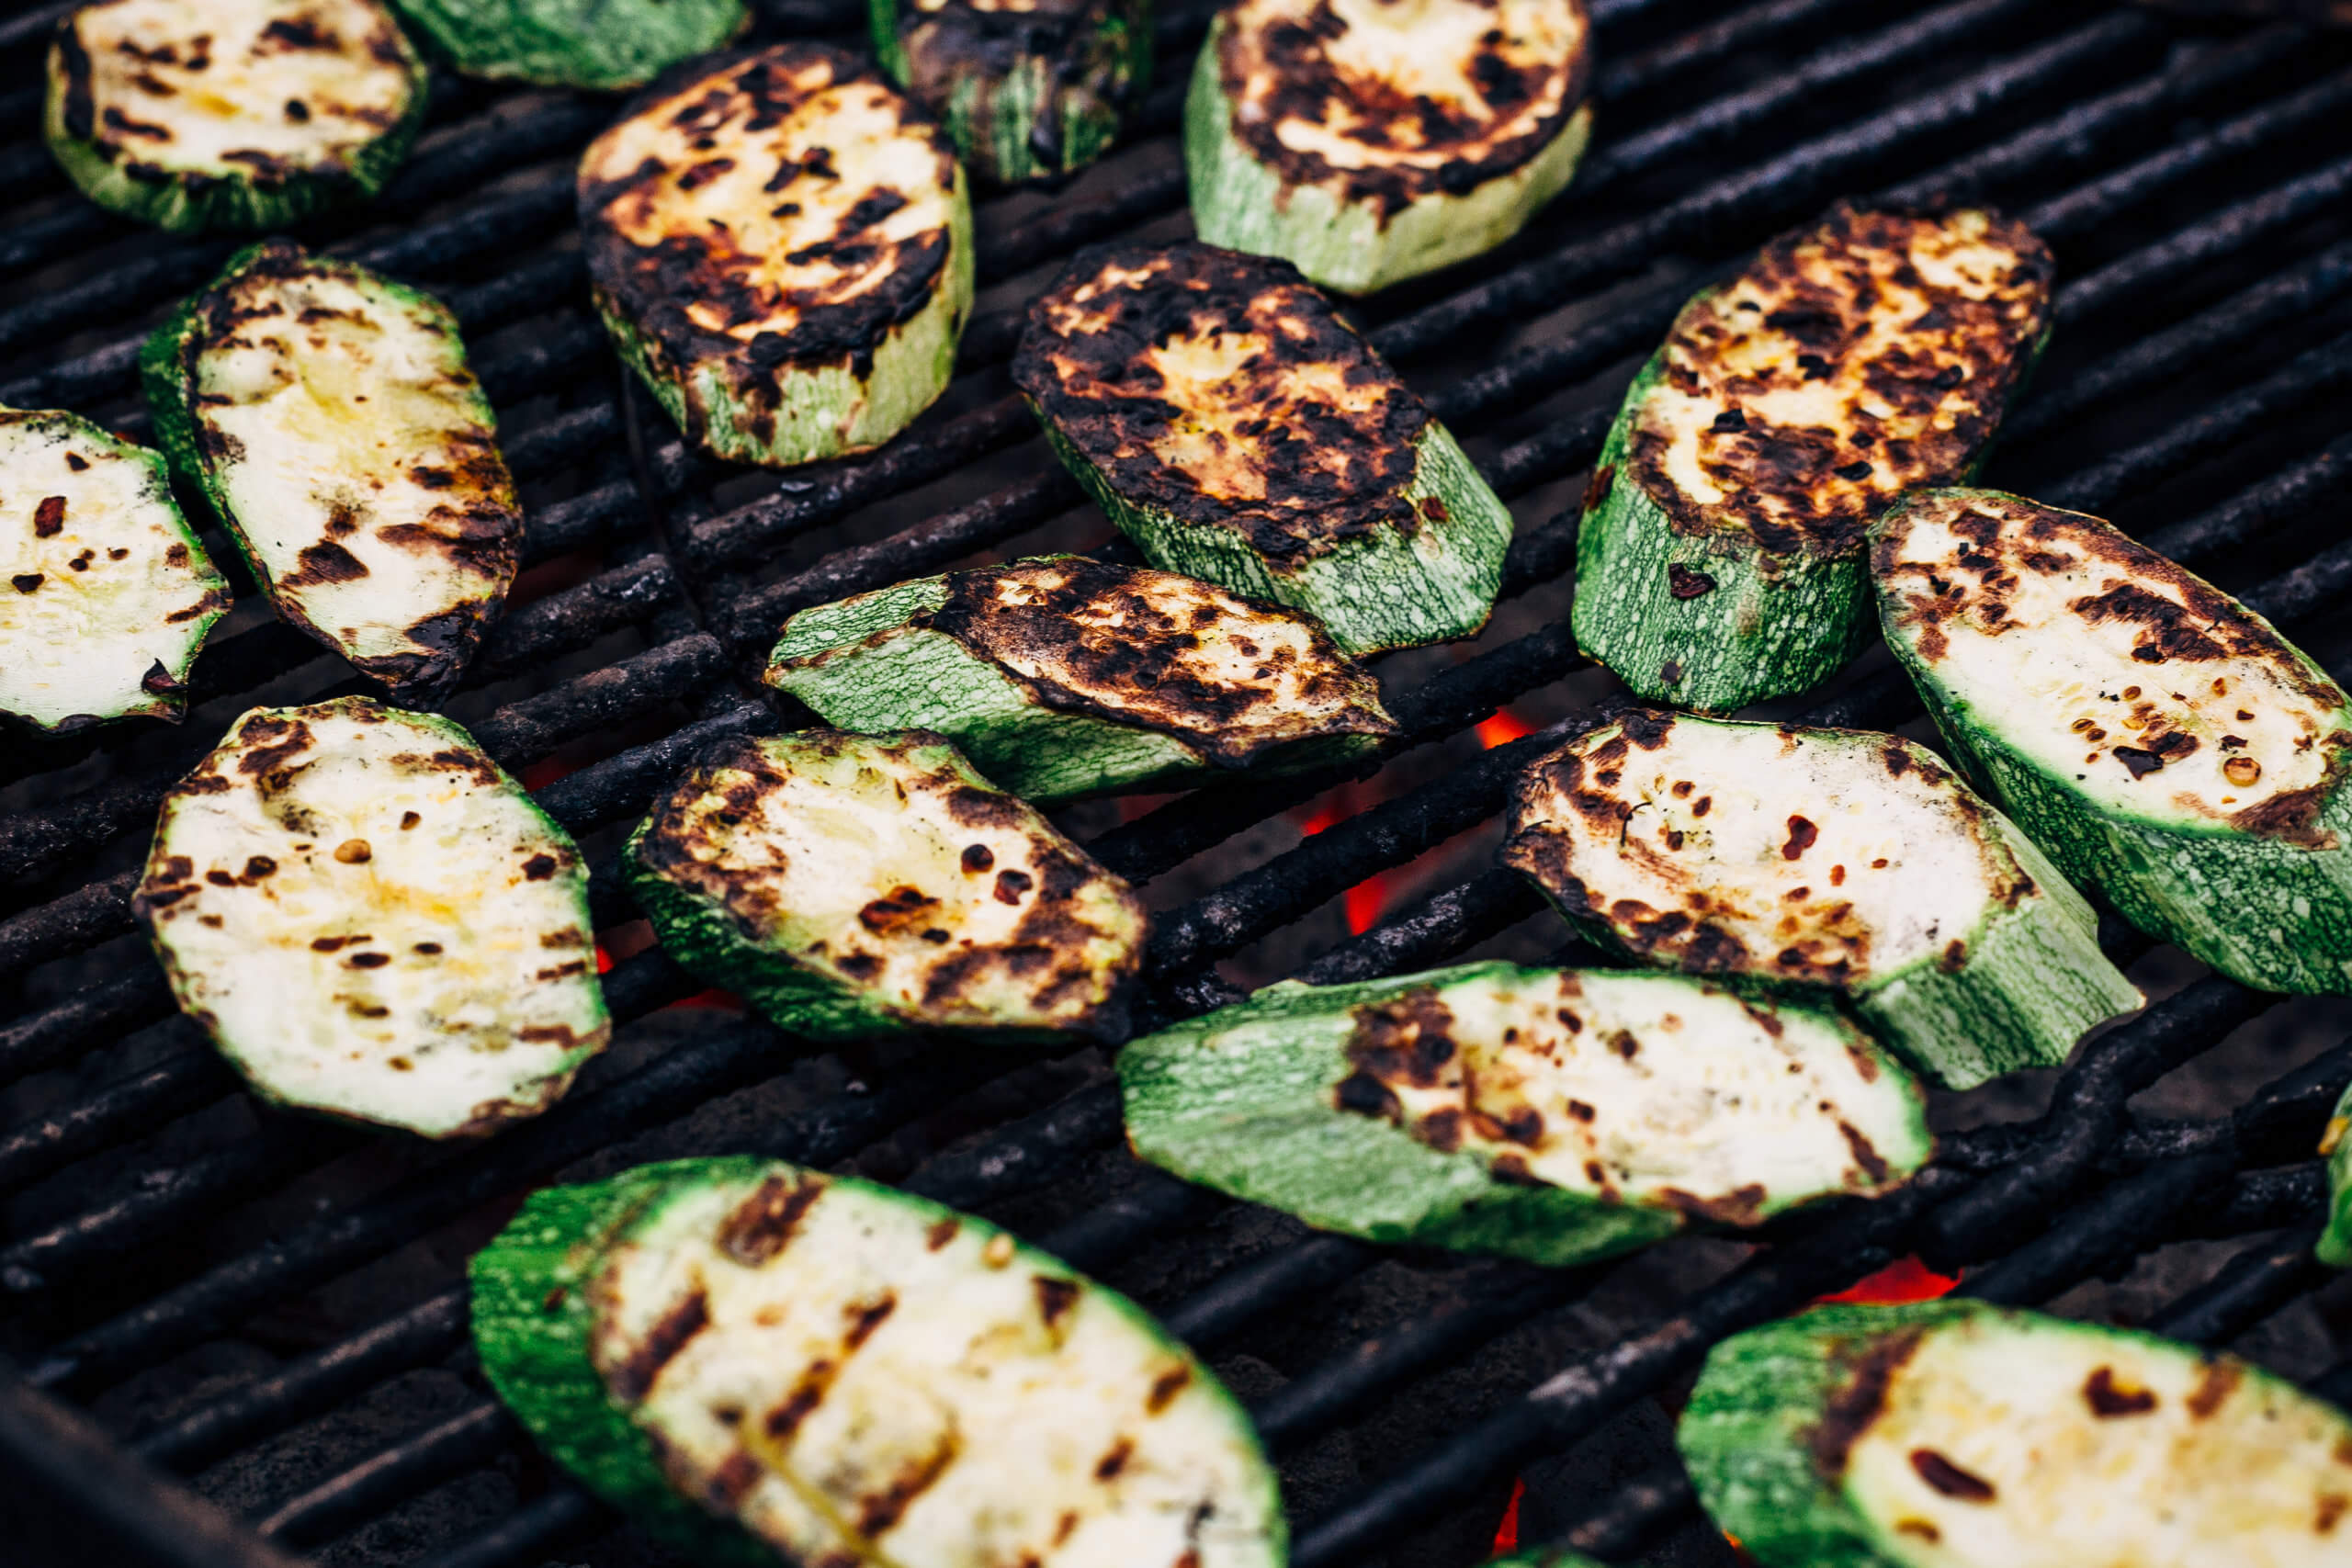 Zucchini on the grill.